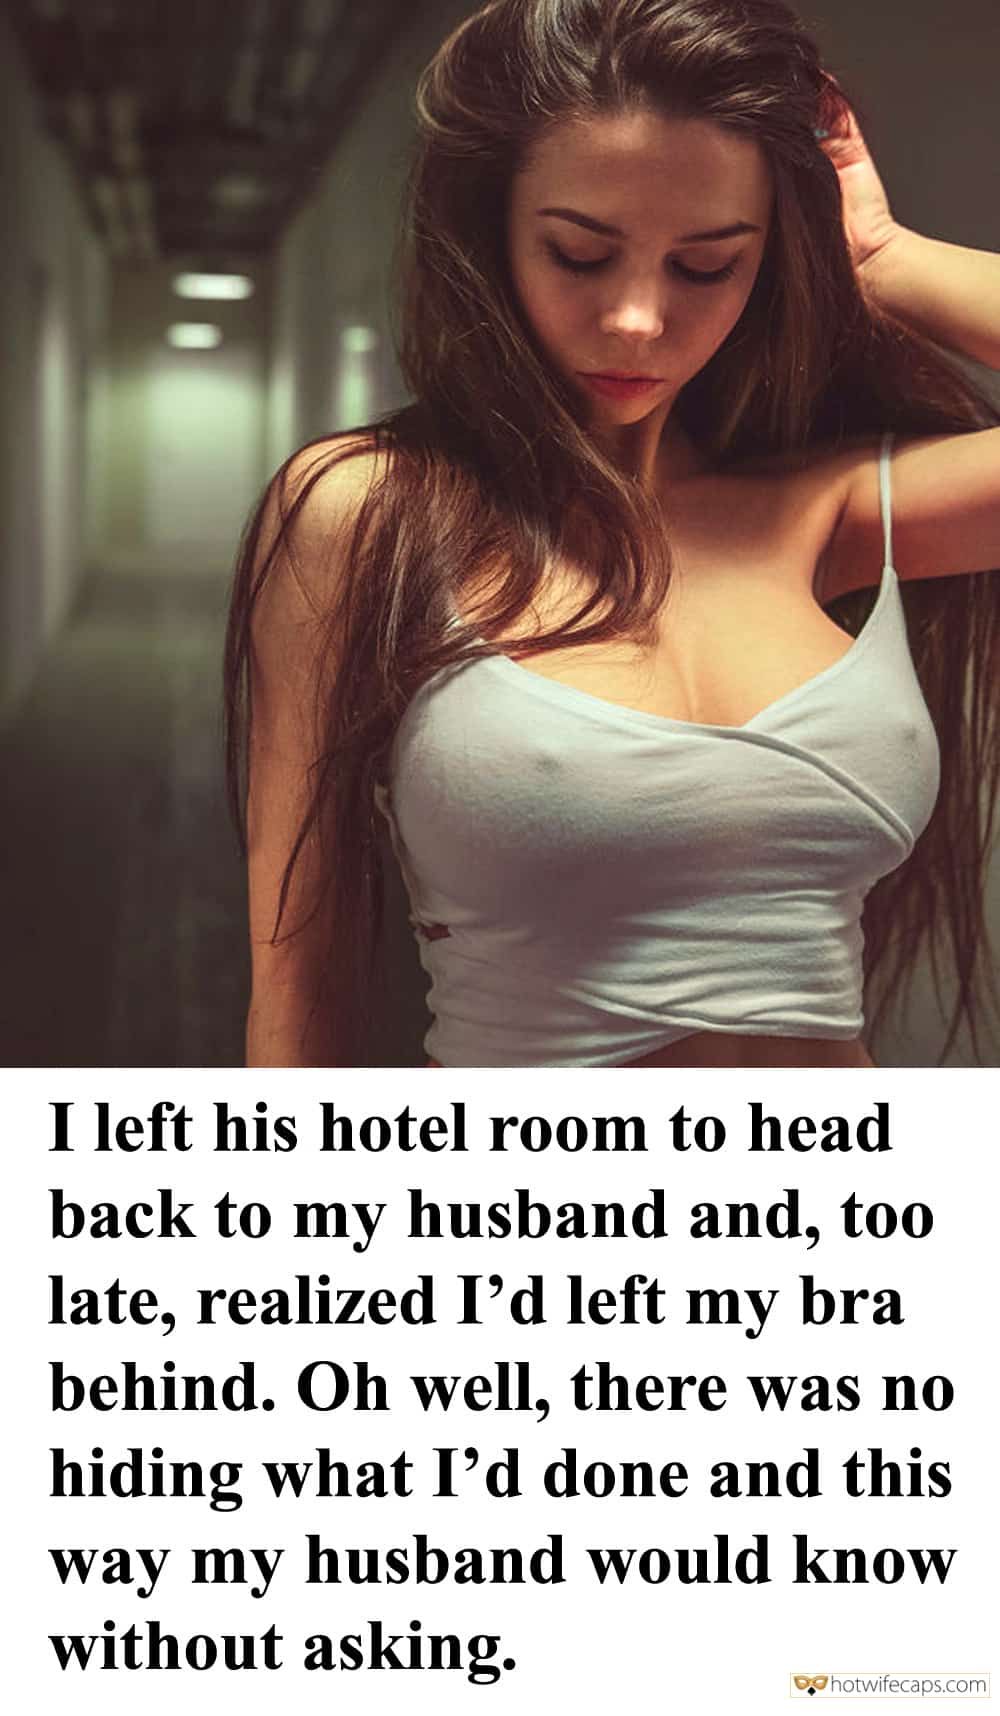 Sexy Memes Hotwife Caption №560656 Slutwife returning back after fuck to husband image picture